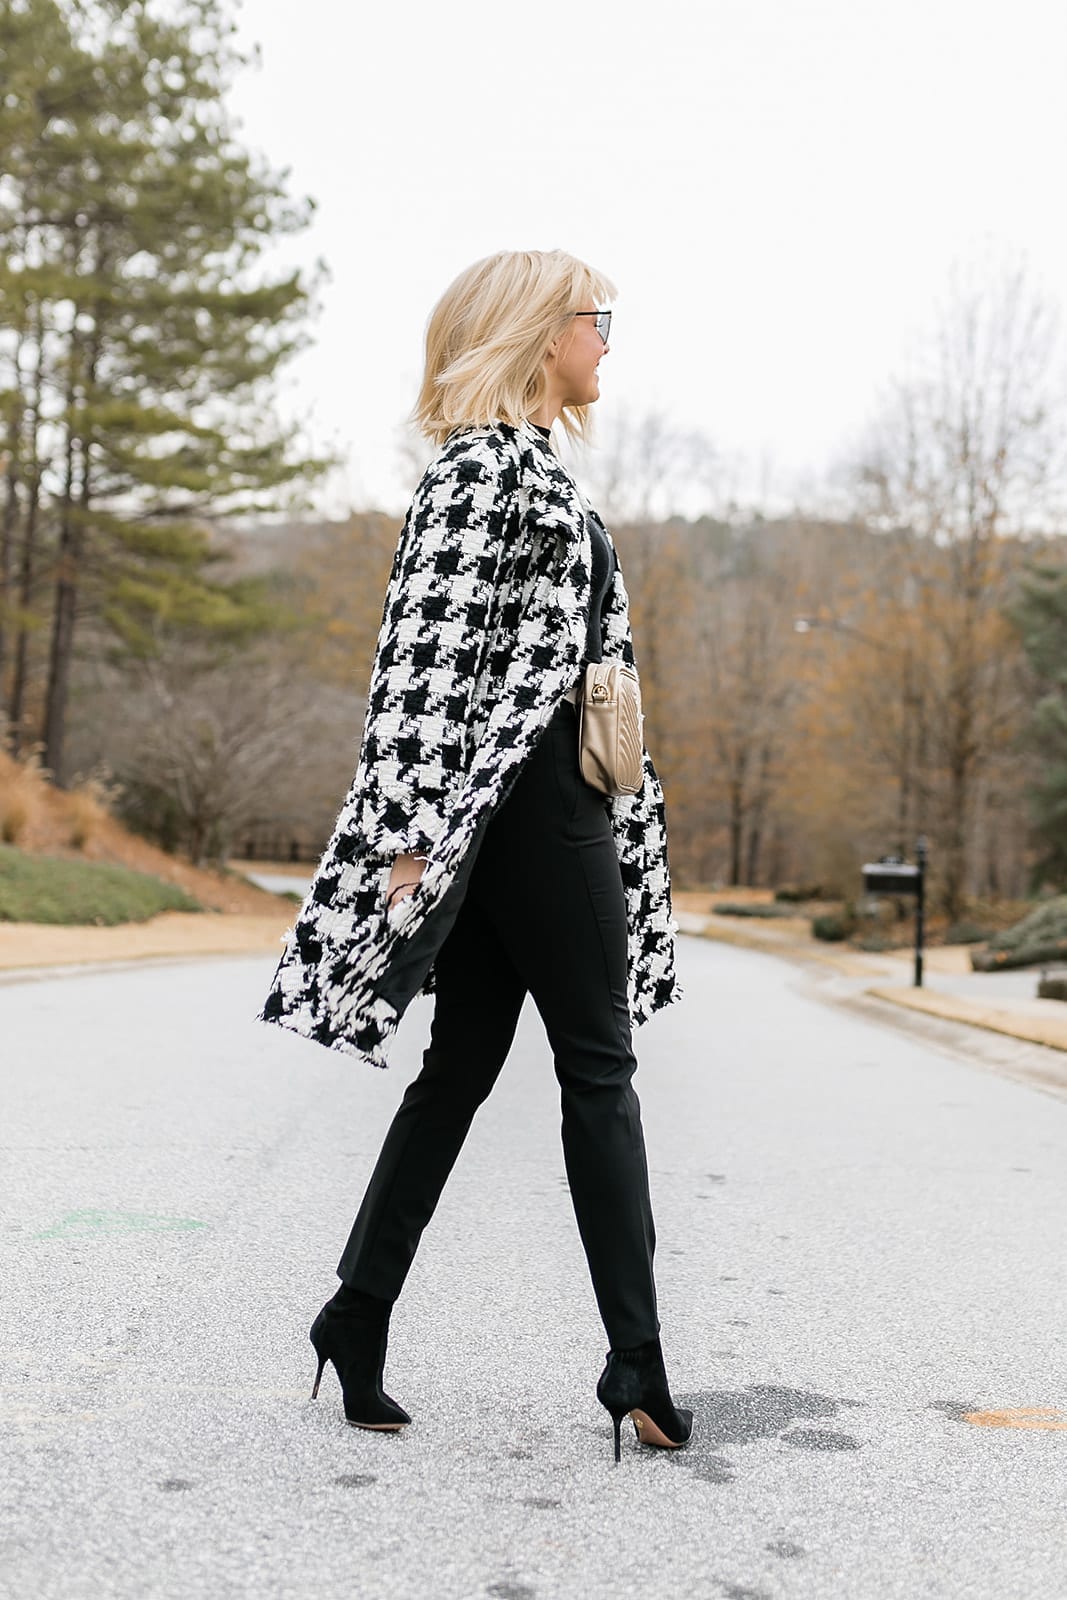 How to wear a belt bag with a coat. This black and white outfit shows how to wear a belt bag underneath a coat to keep your belongings safe while you're out, but not get in the way of rocking a killer houndstooth winter coat!